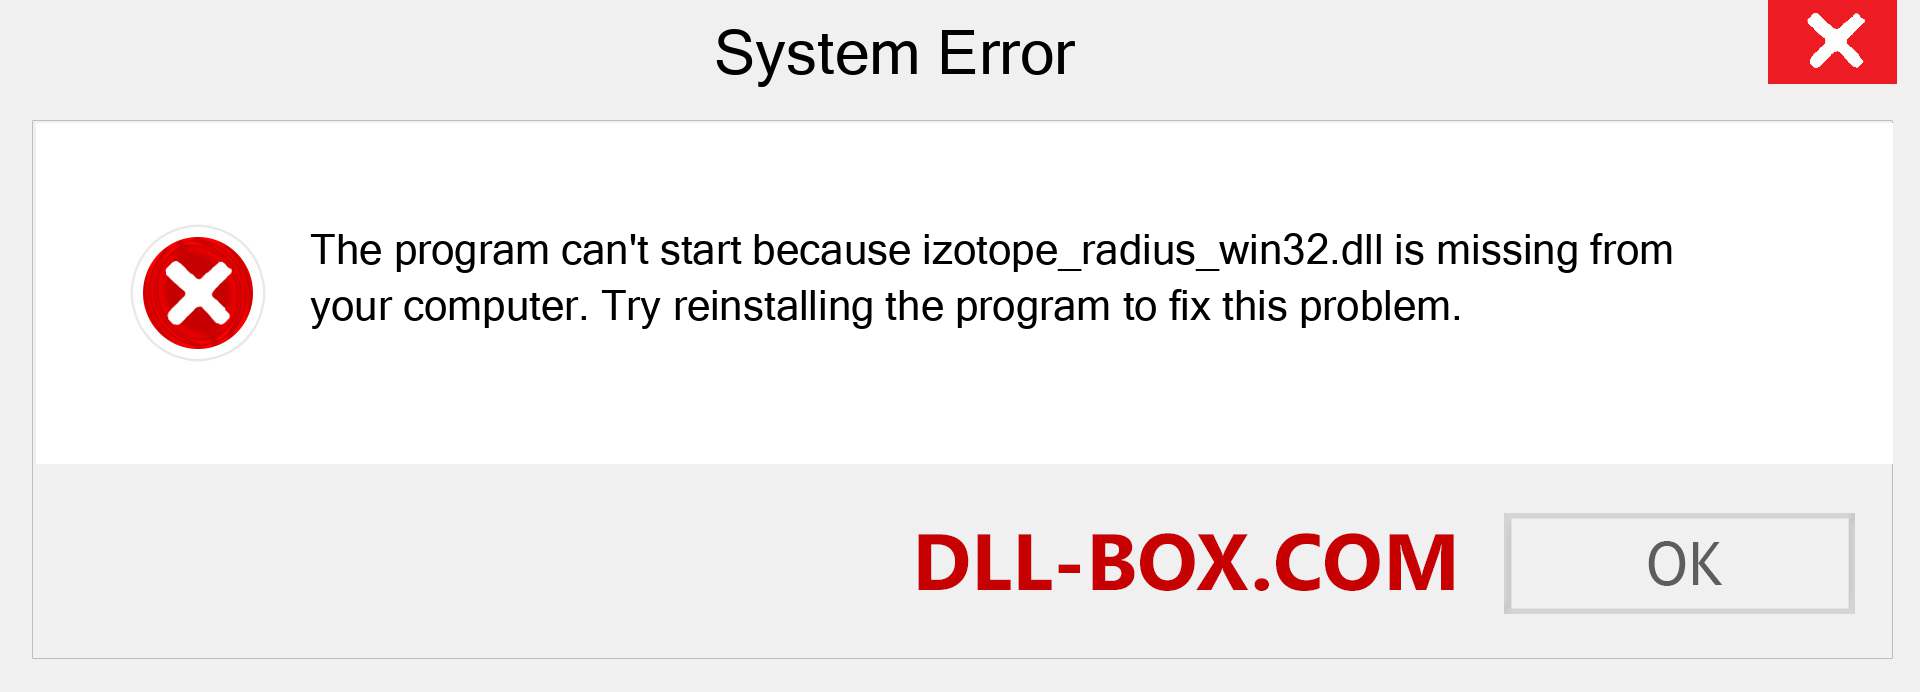  izotope_radius_win32.dll file is missing?. Download for Windows 7, 8, 10 - Fix  izotope_radius_win32 dll Missing Error on Windows, photos, images